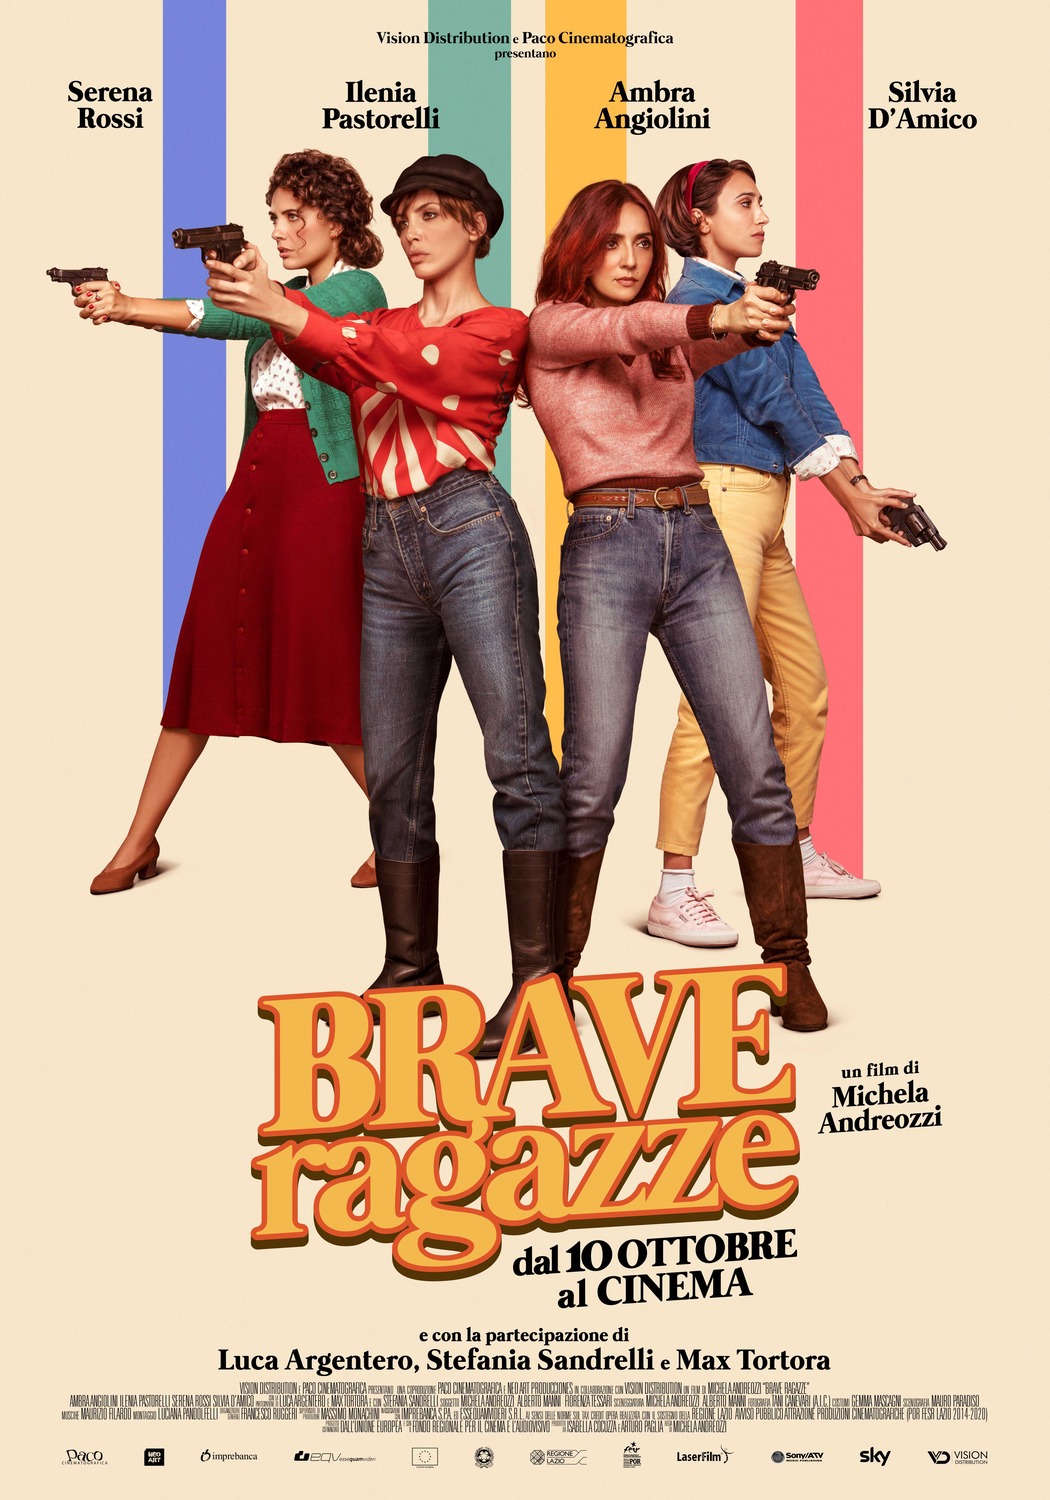 Extra Large Movie Poster Image for Brave ragazze (#1 of 5)